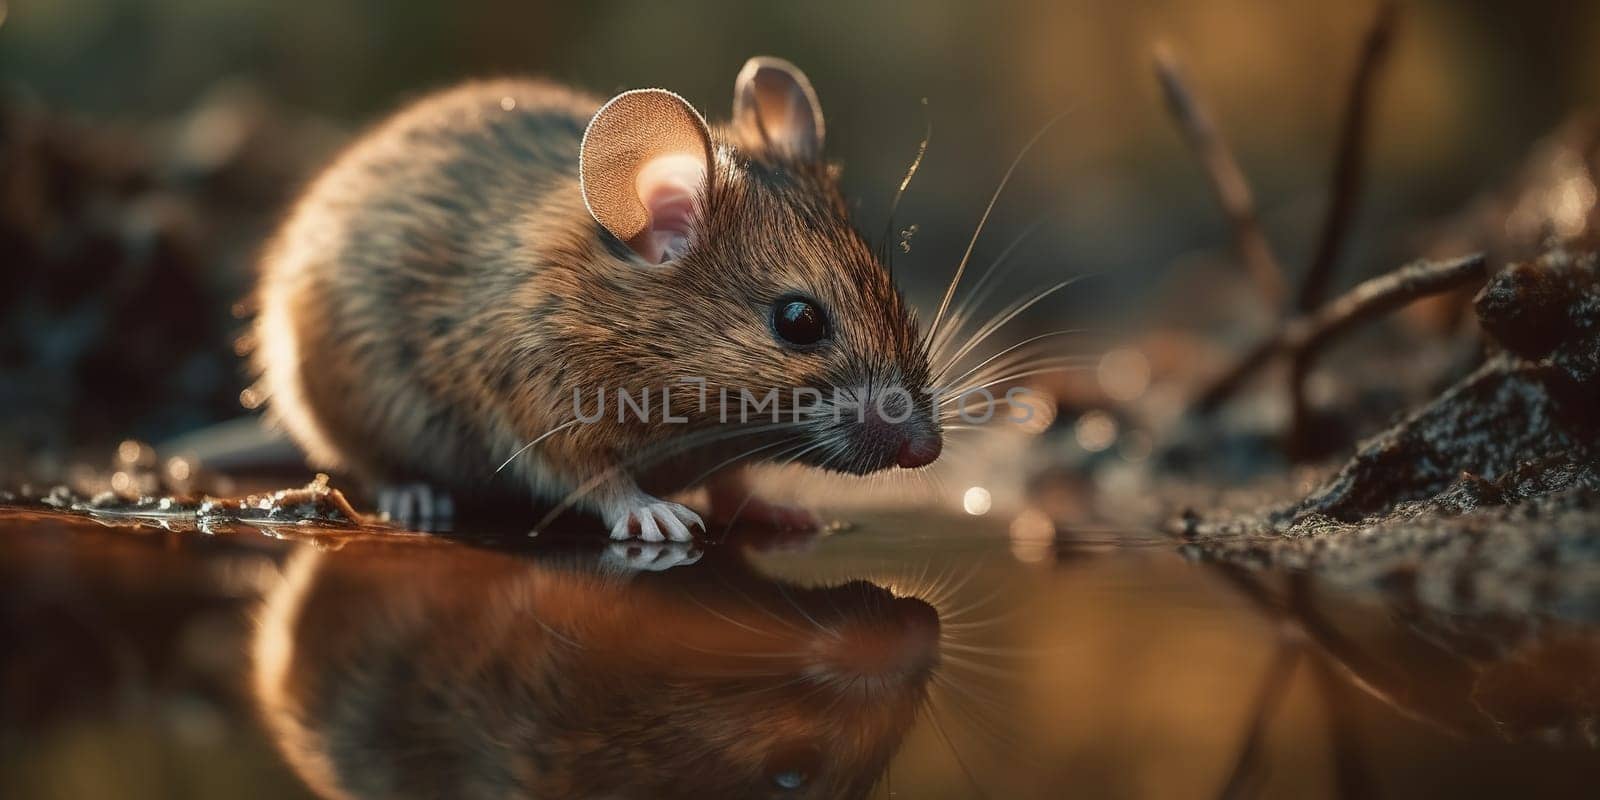 Grey Wild Mouse Drinks Water Form The Puddle In The Forest, Animal In Natural Habitat